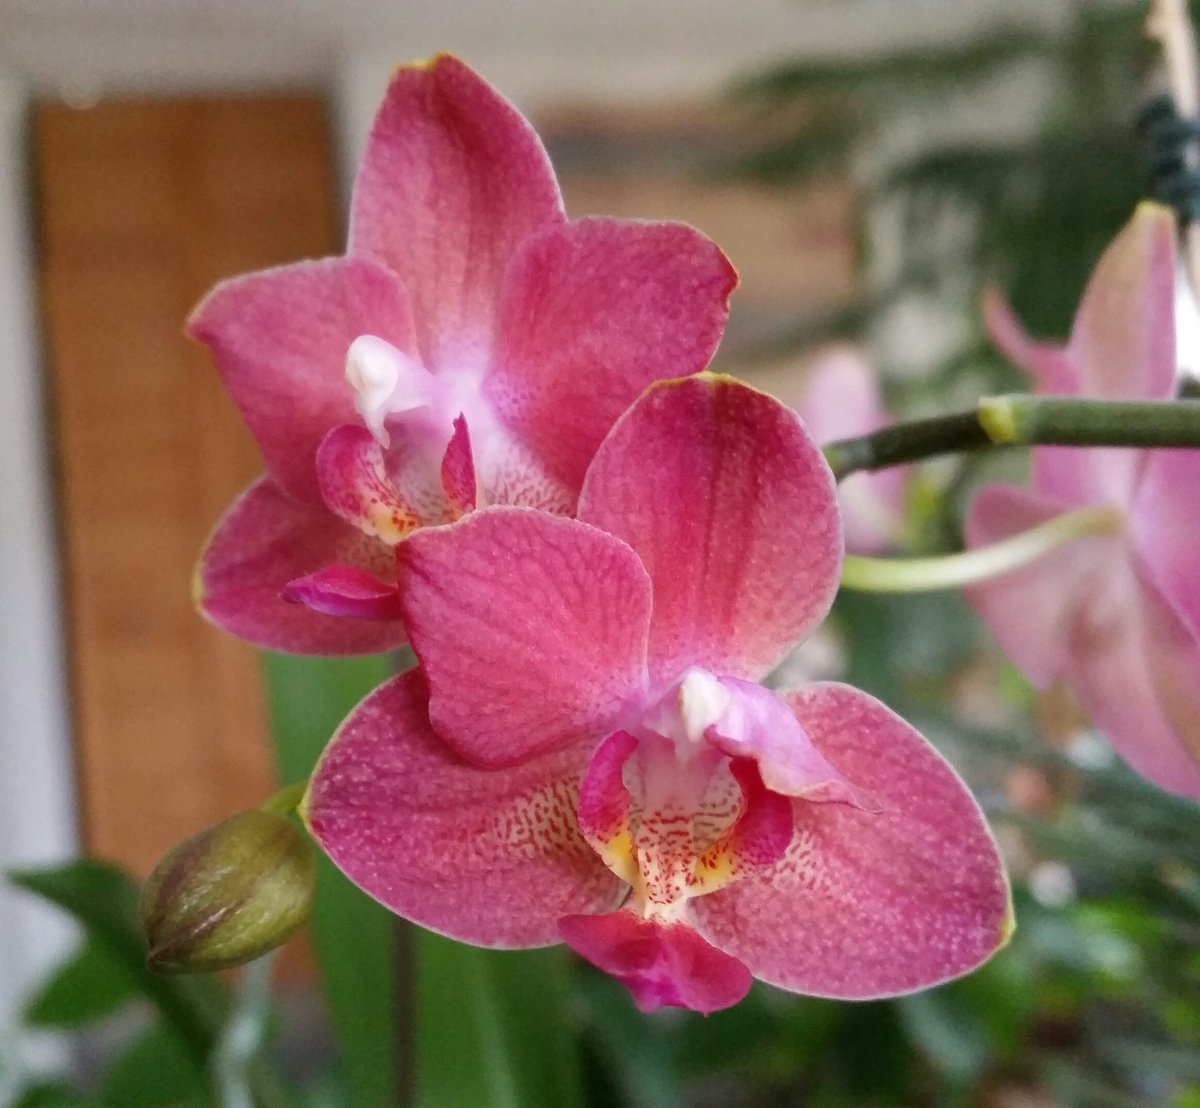 # 5 orchid #Phalaenopsis #loveorchids #orchid